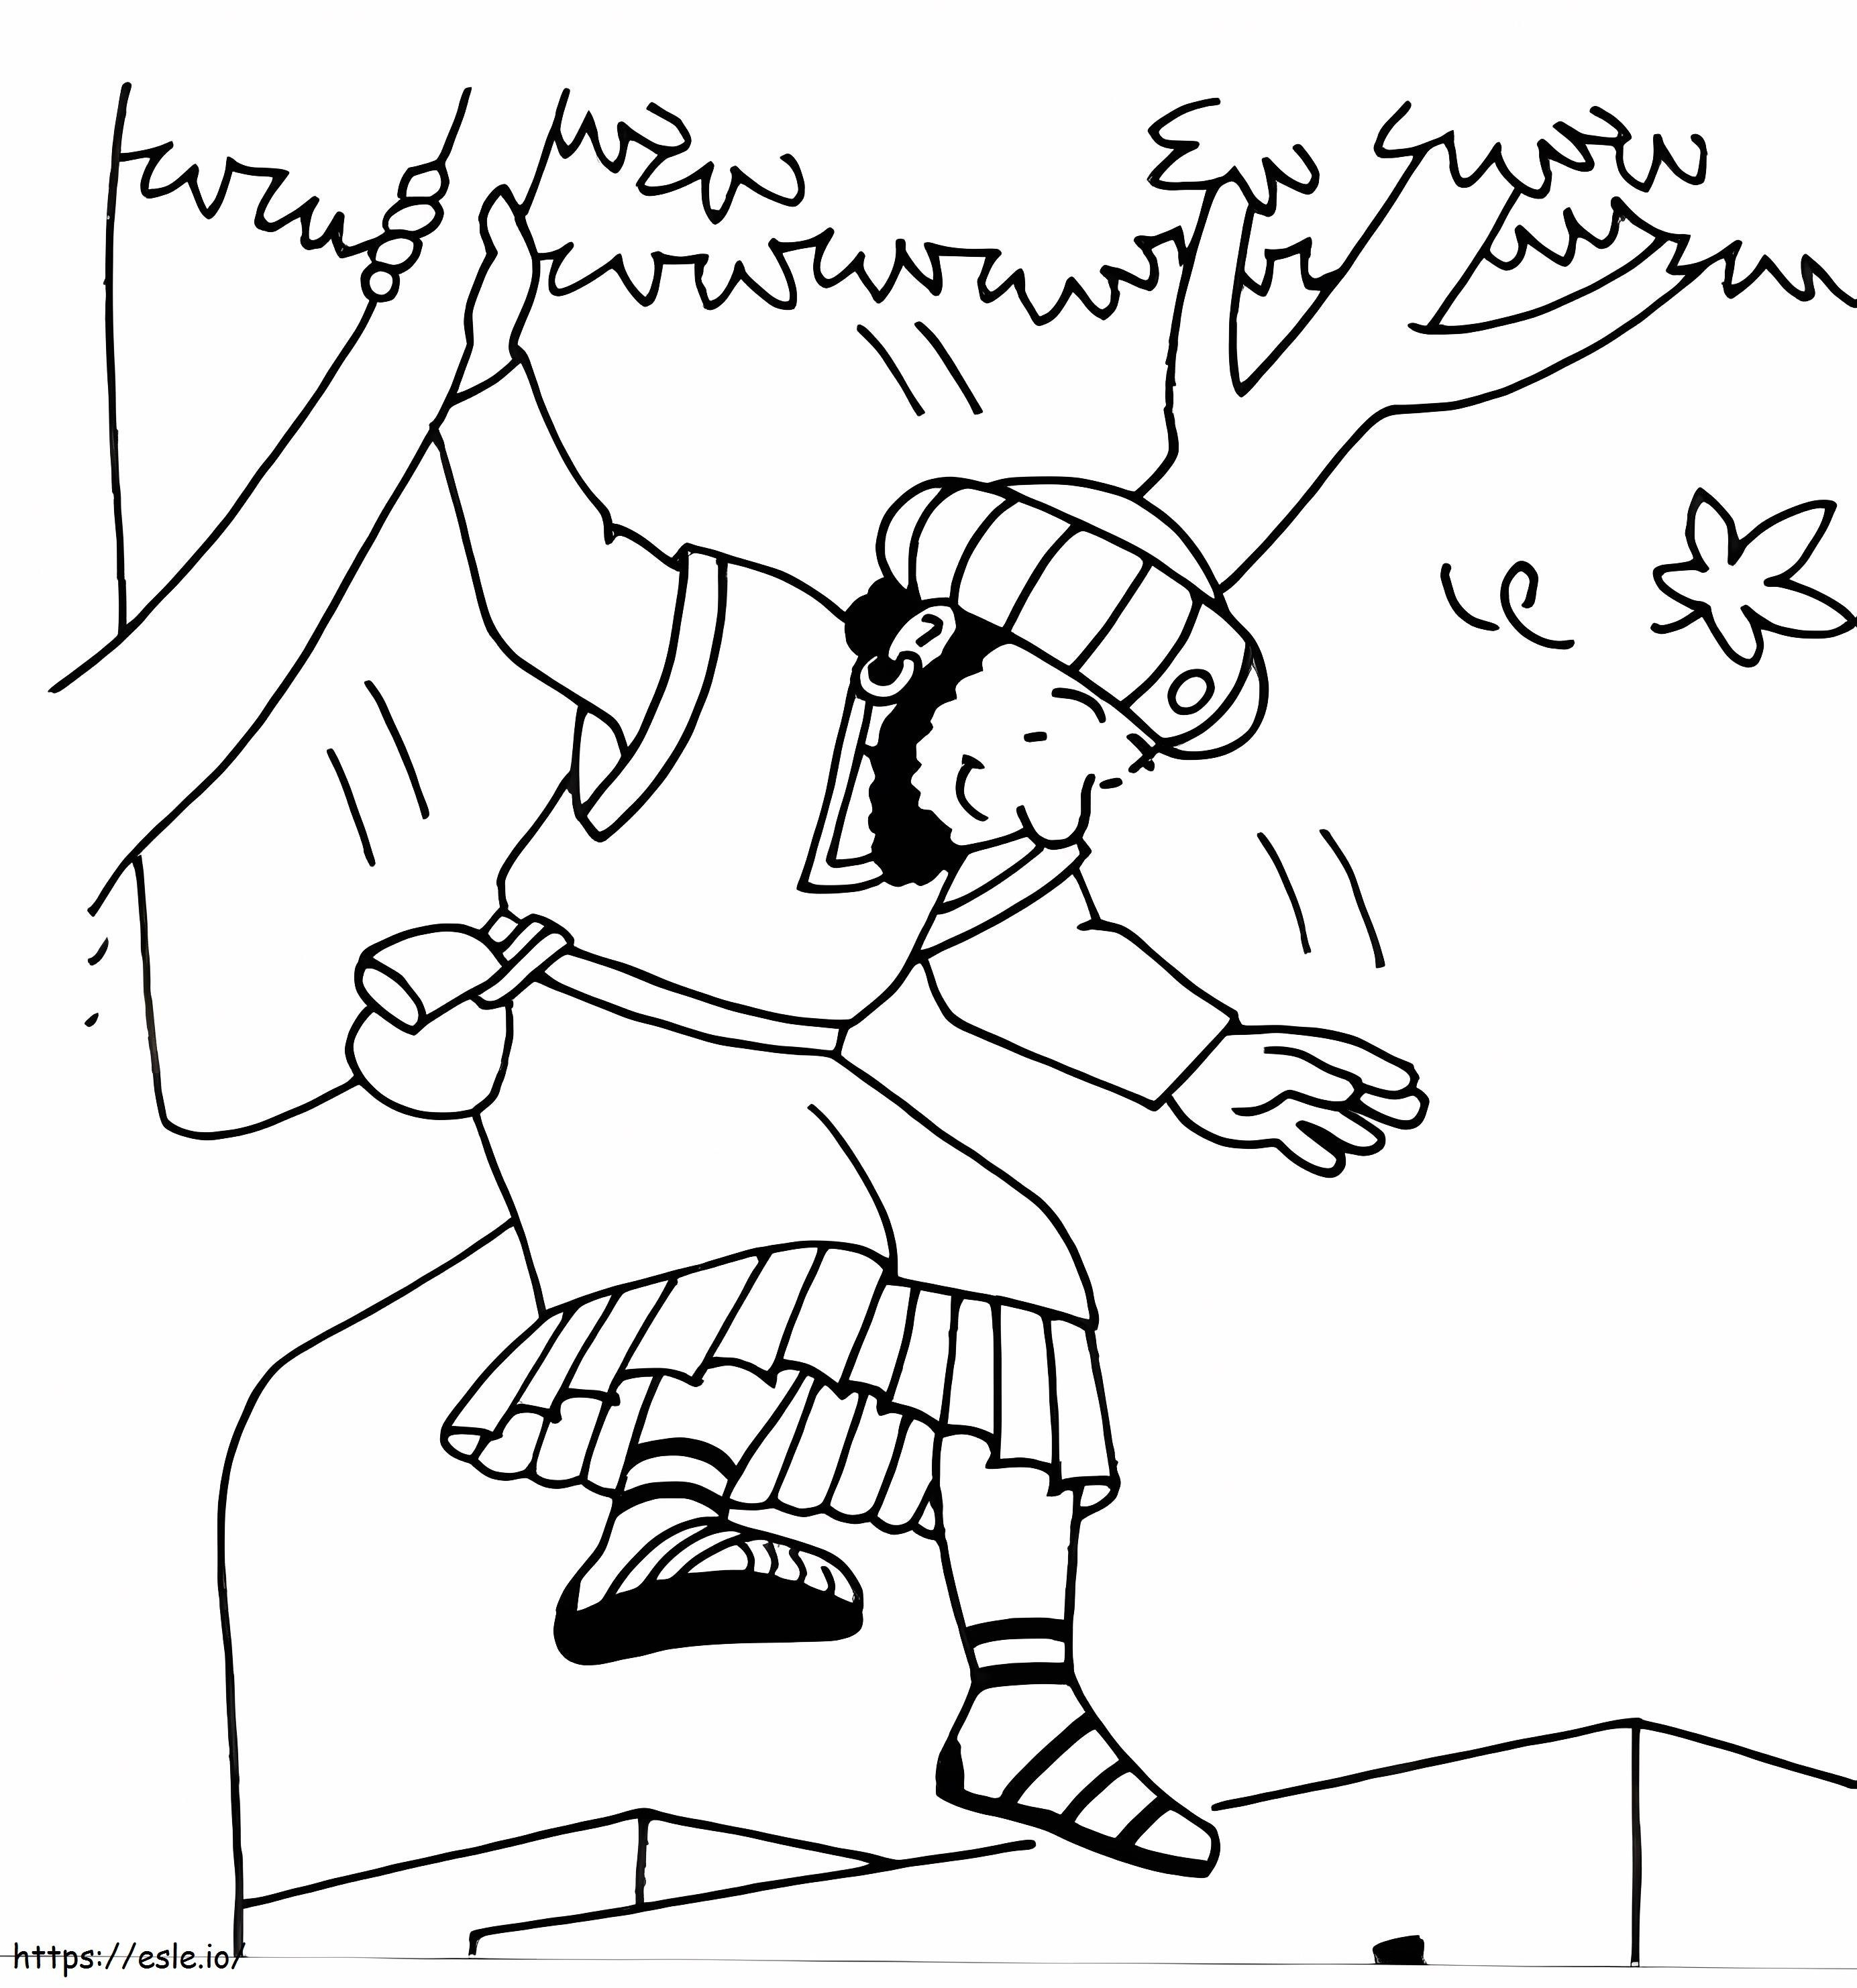 Zacchaeus On The Tree coloring page